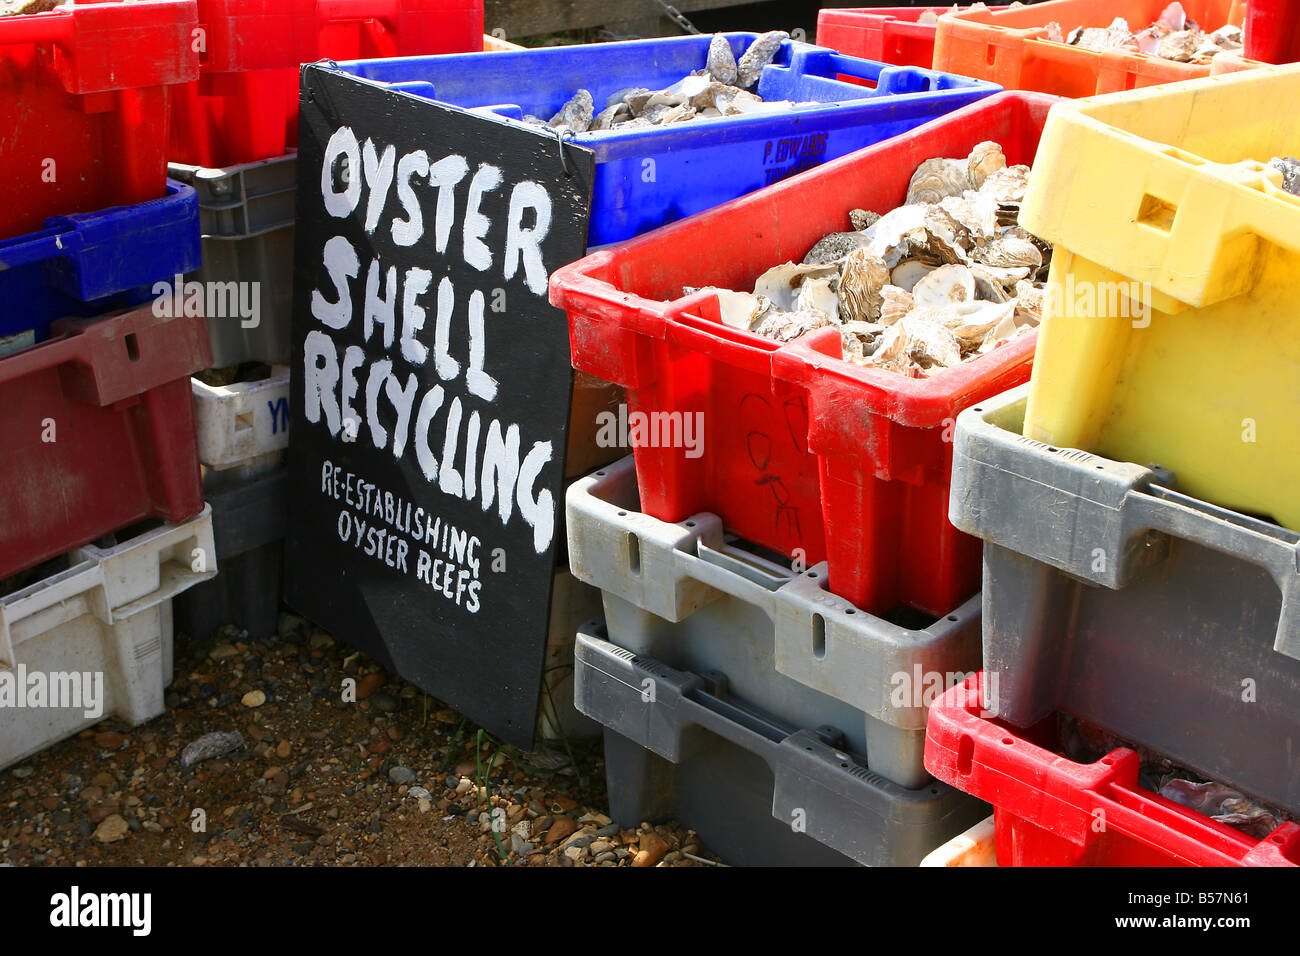 Recycling oyster shells at Whitstable, Kent, UK Stock Photo